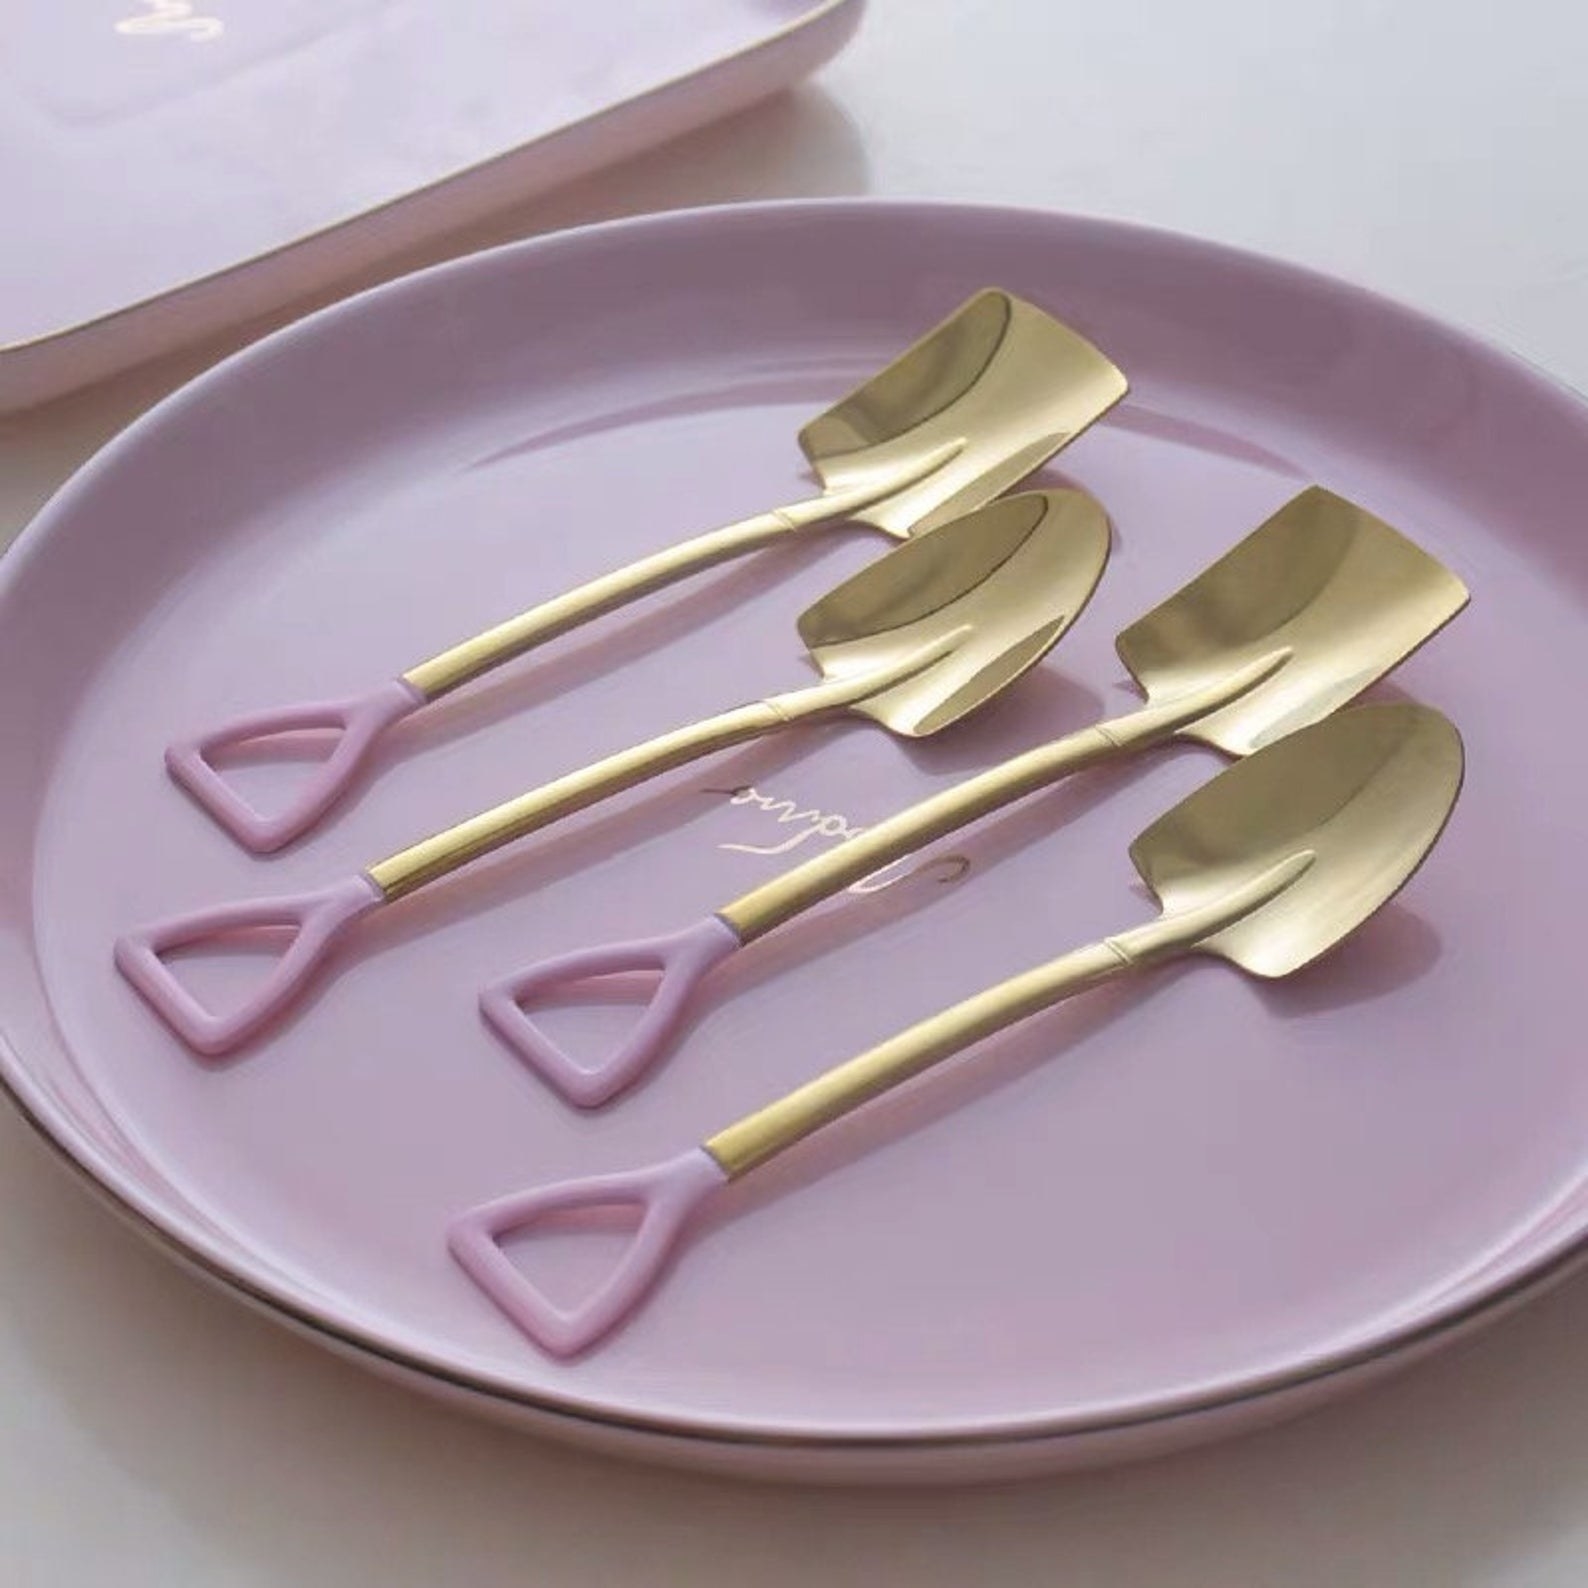 gold spoons that look like tiny shovels